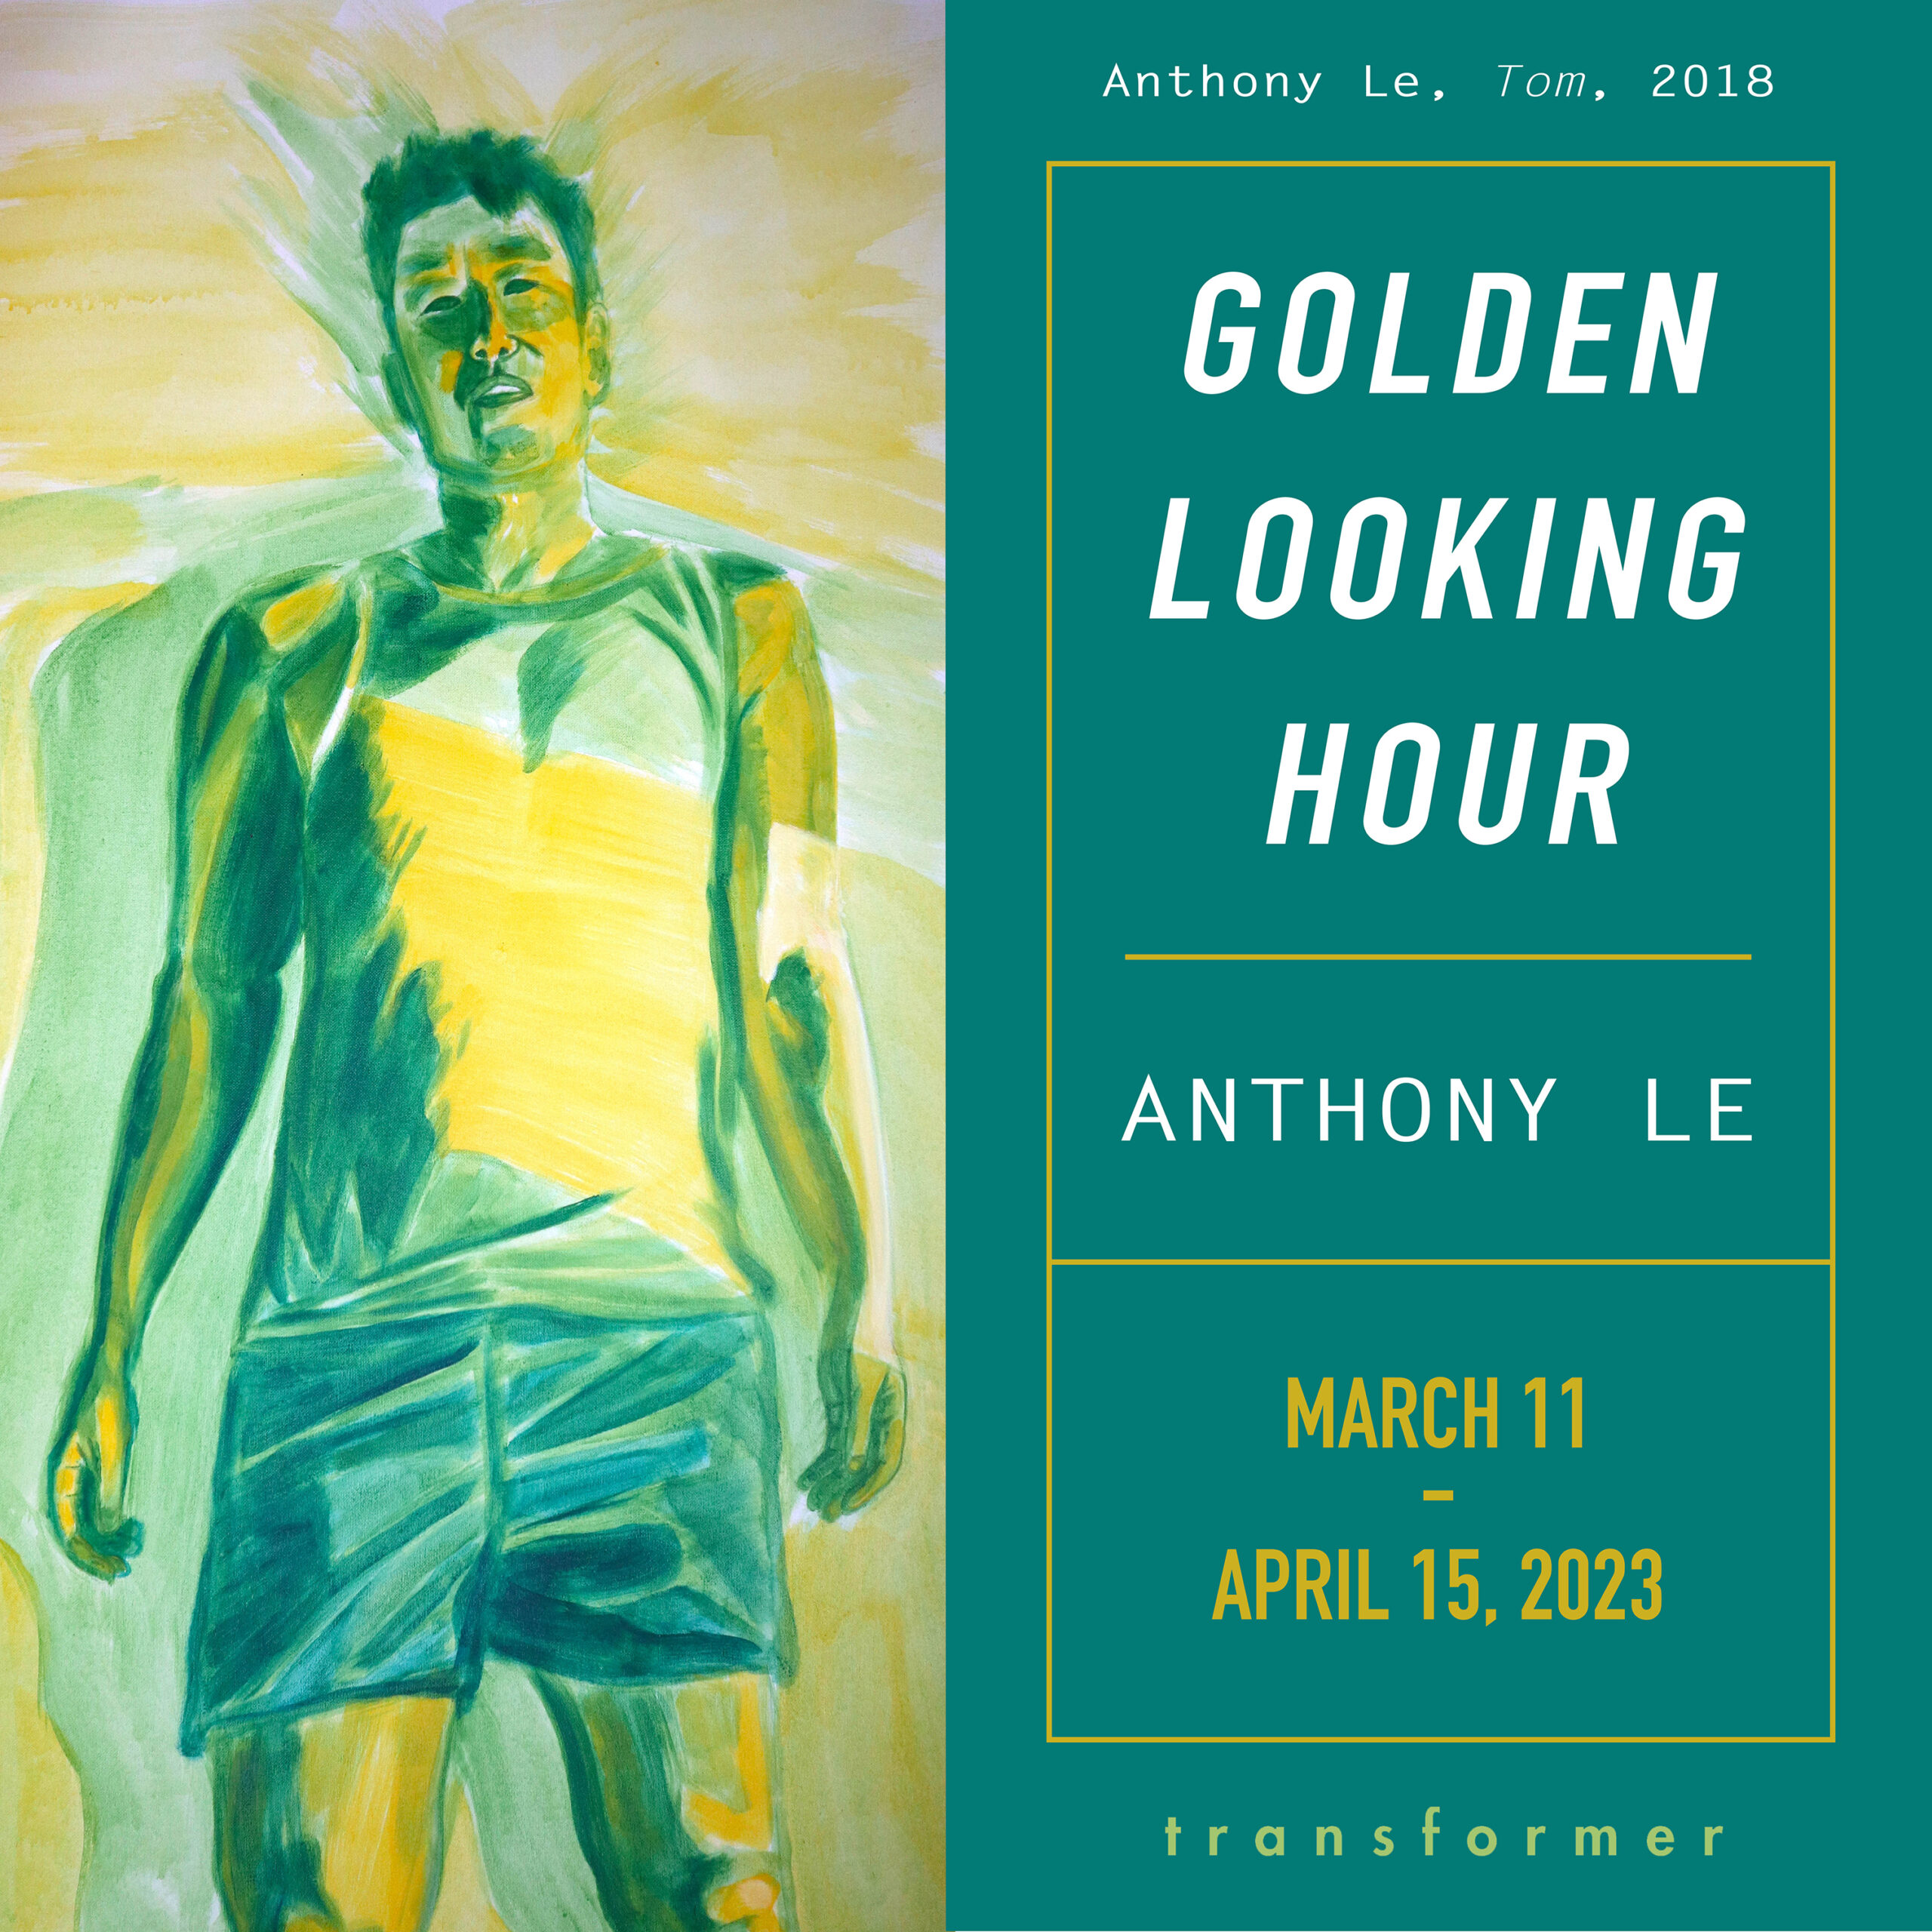 Anthony Le “Golden Looking Hour” Artist Talk  at Transformer